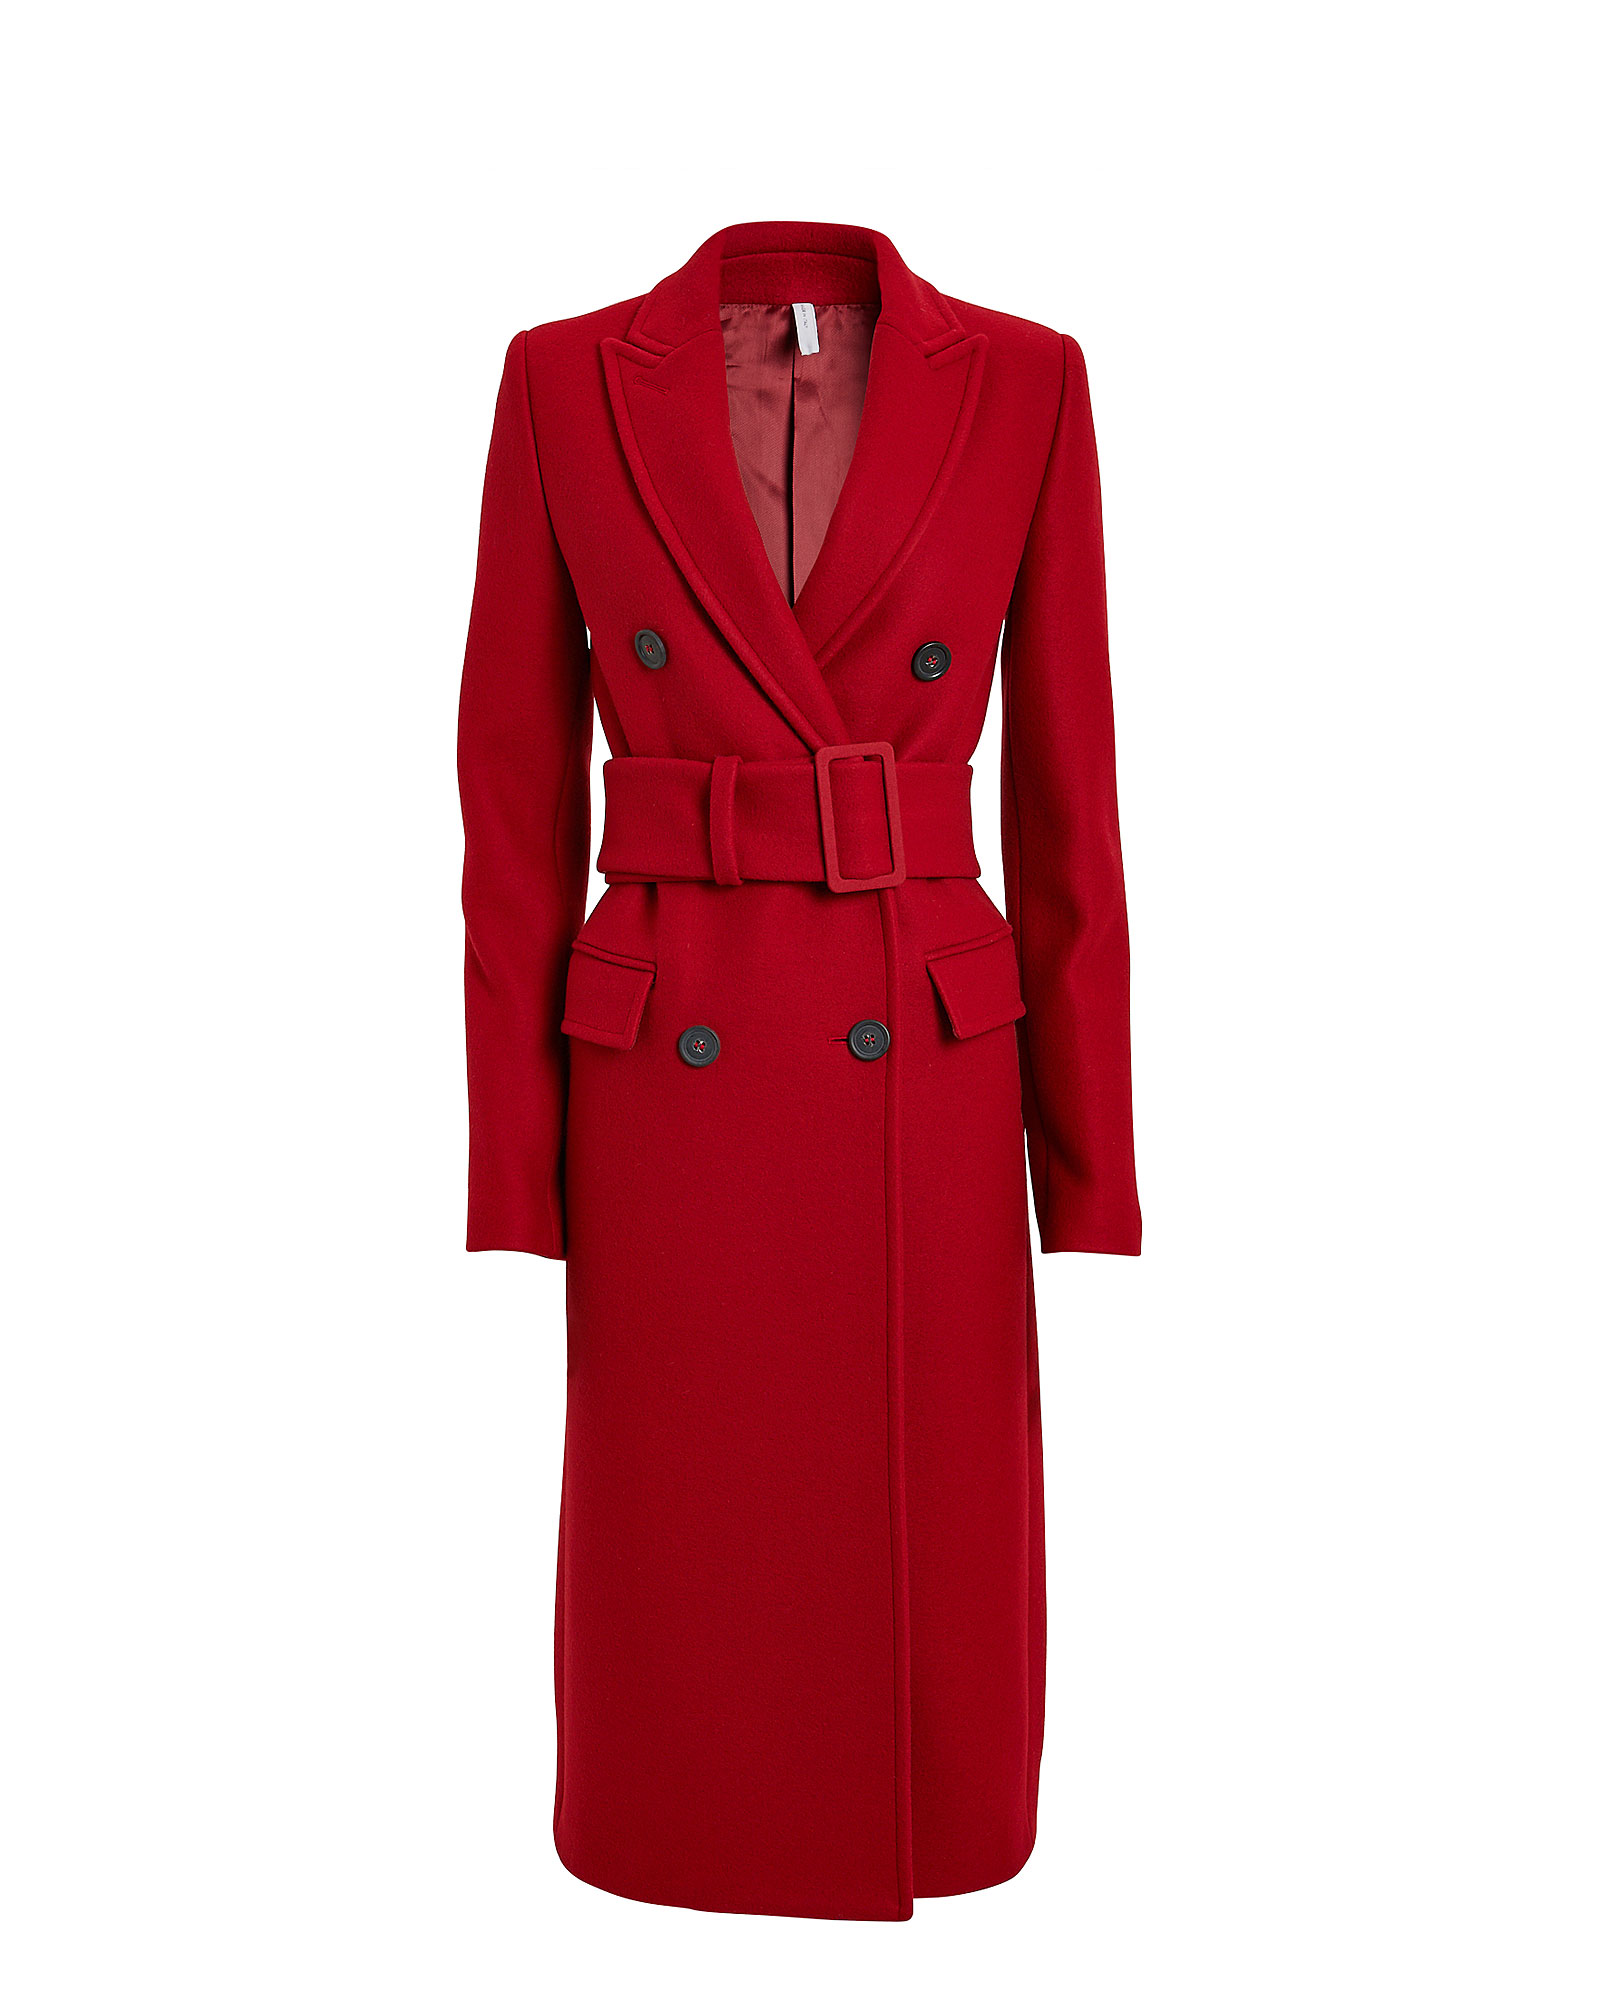 Helmut Lang Melton Wool Double Breasted Coat in red | INTERMIX®